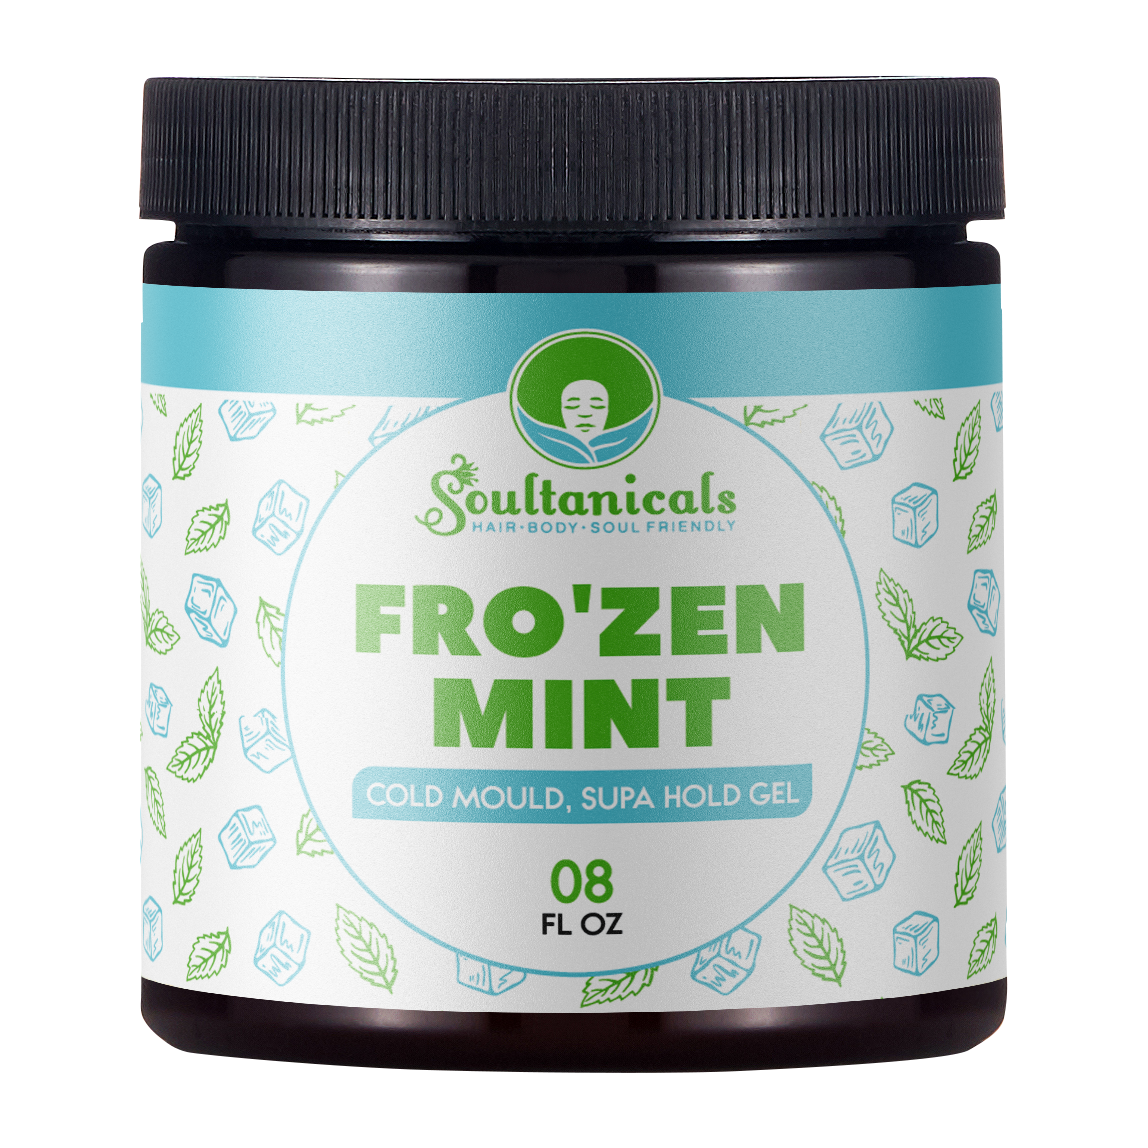 FRO'ZEN Mint- Cold Mould, Supa Hold Gel